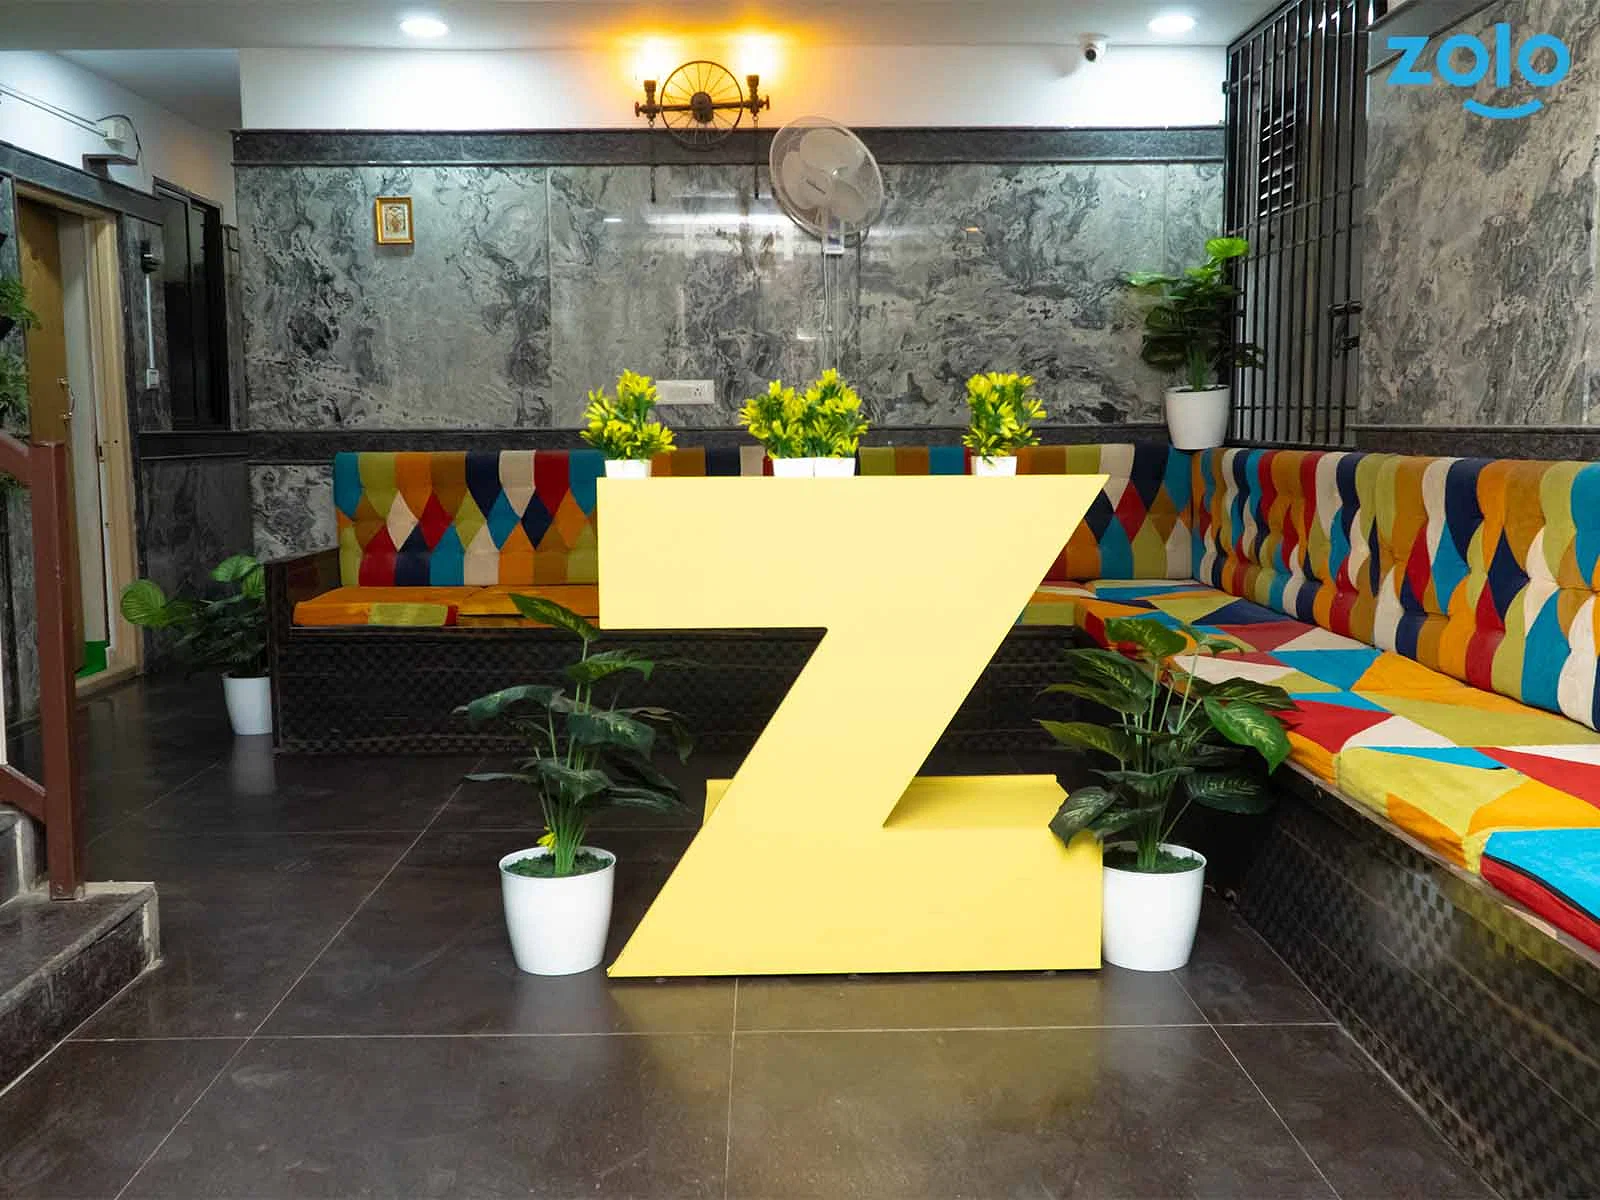 Affordable single rooms for students and working professionals in Electronic City Phase 2-Bangalore-Zolo Highstreet B